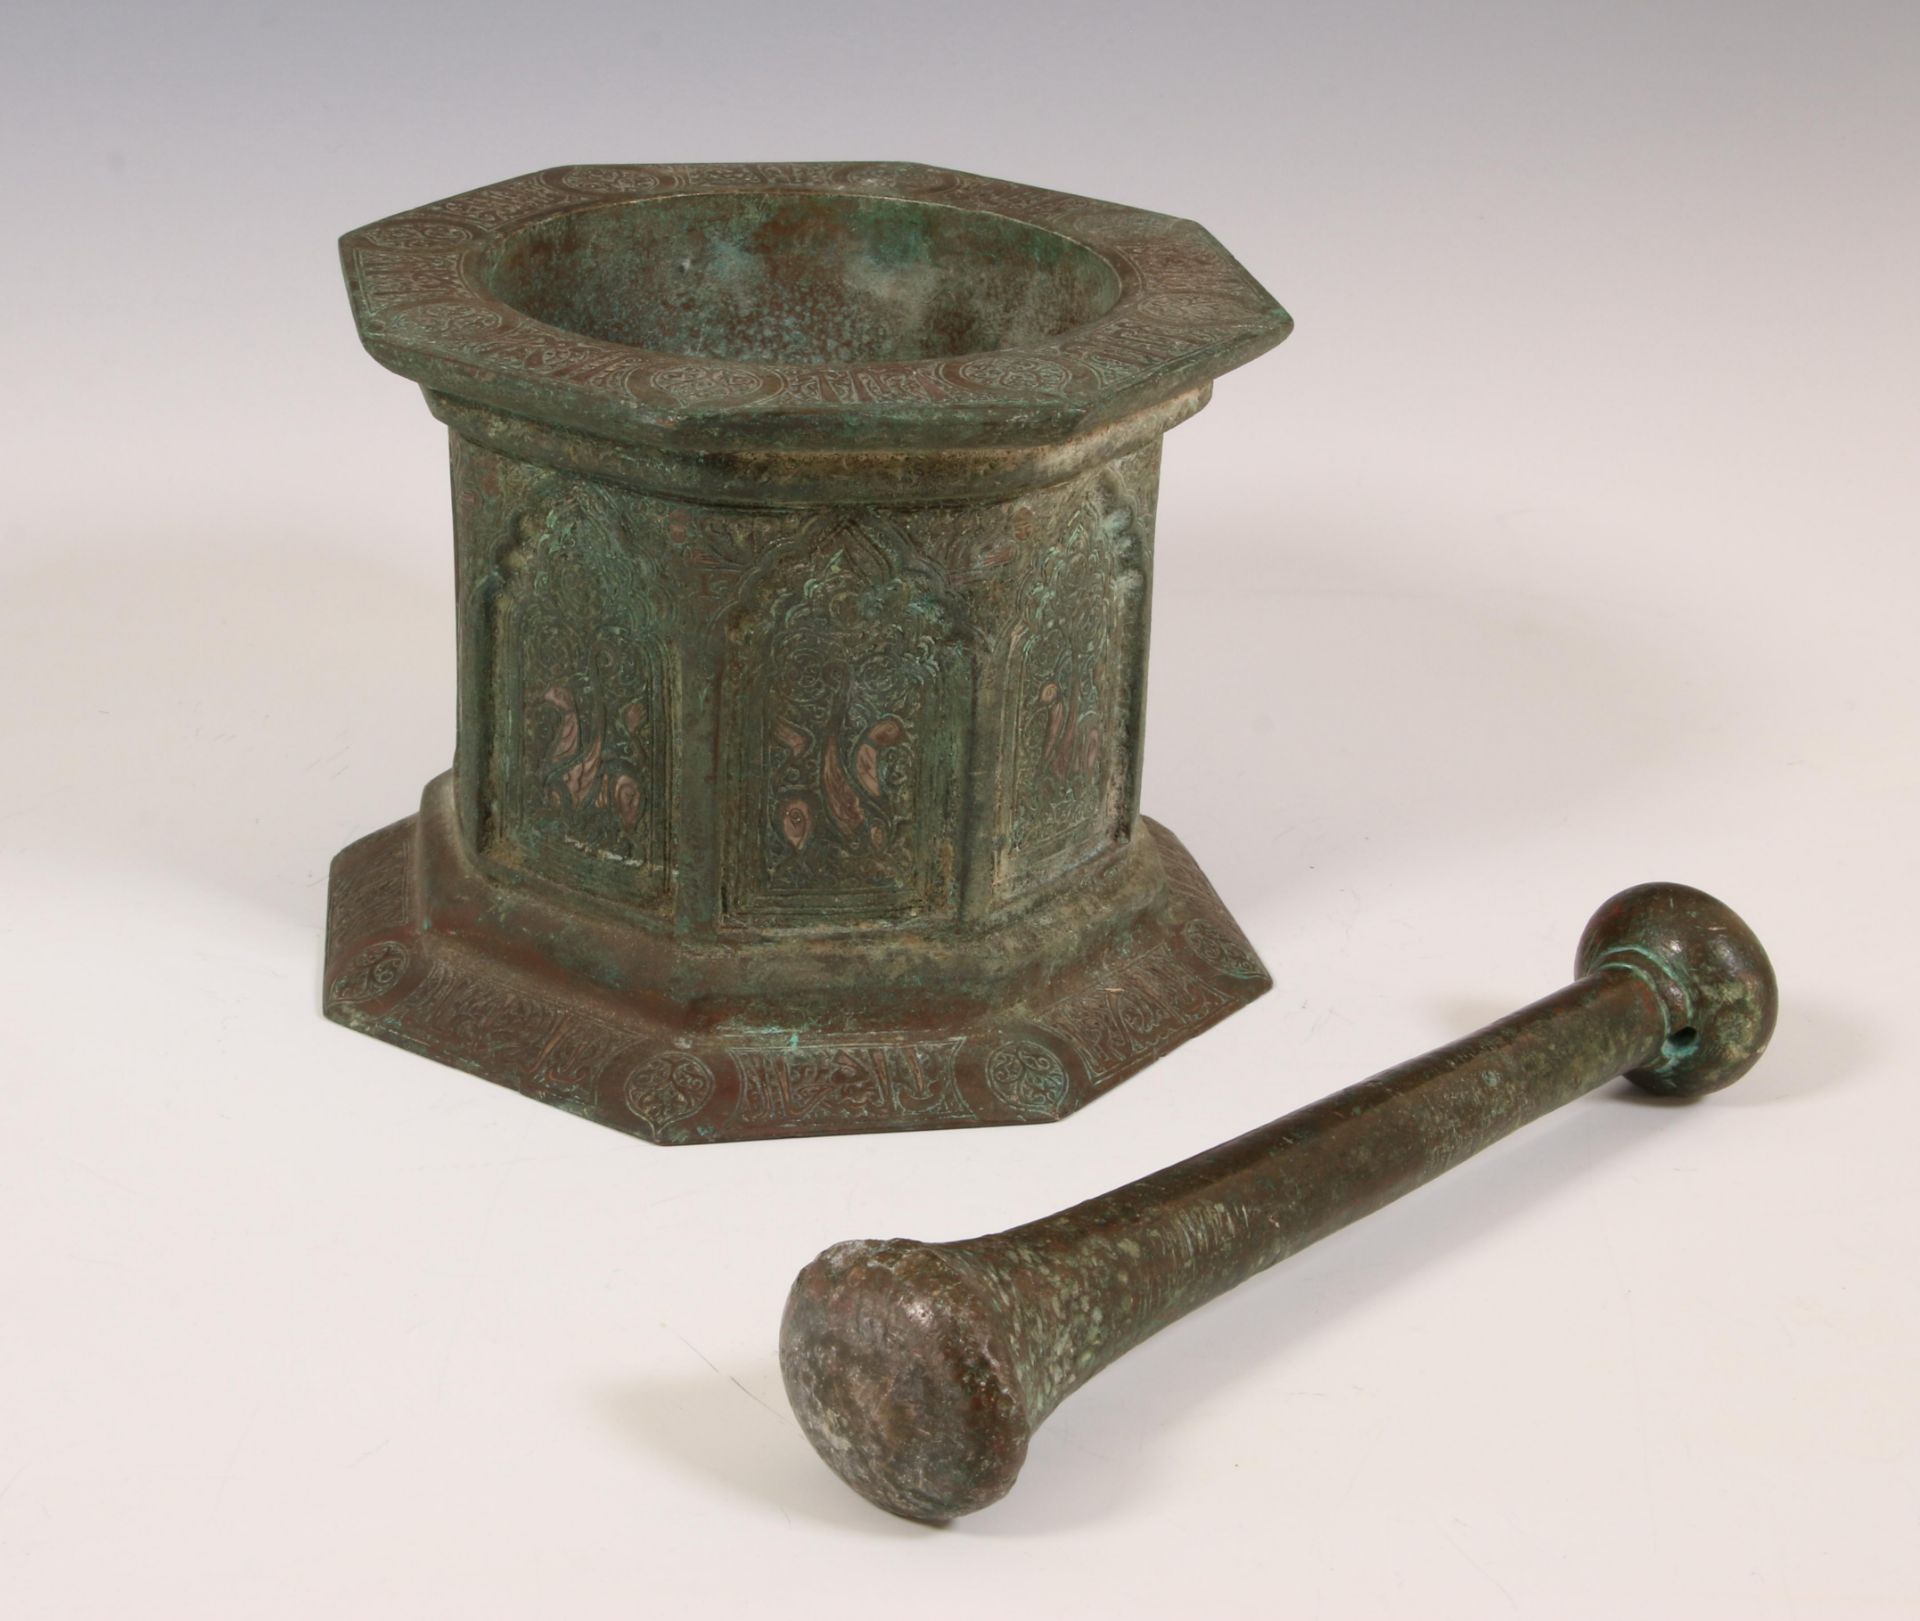 Iran, a bronze antique mortar and pestle in Khorassan style, 19th century - Image 3 of 3